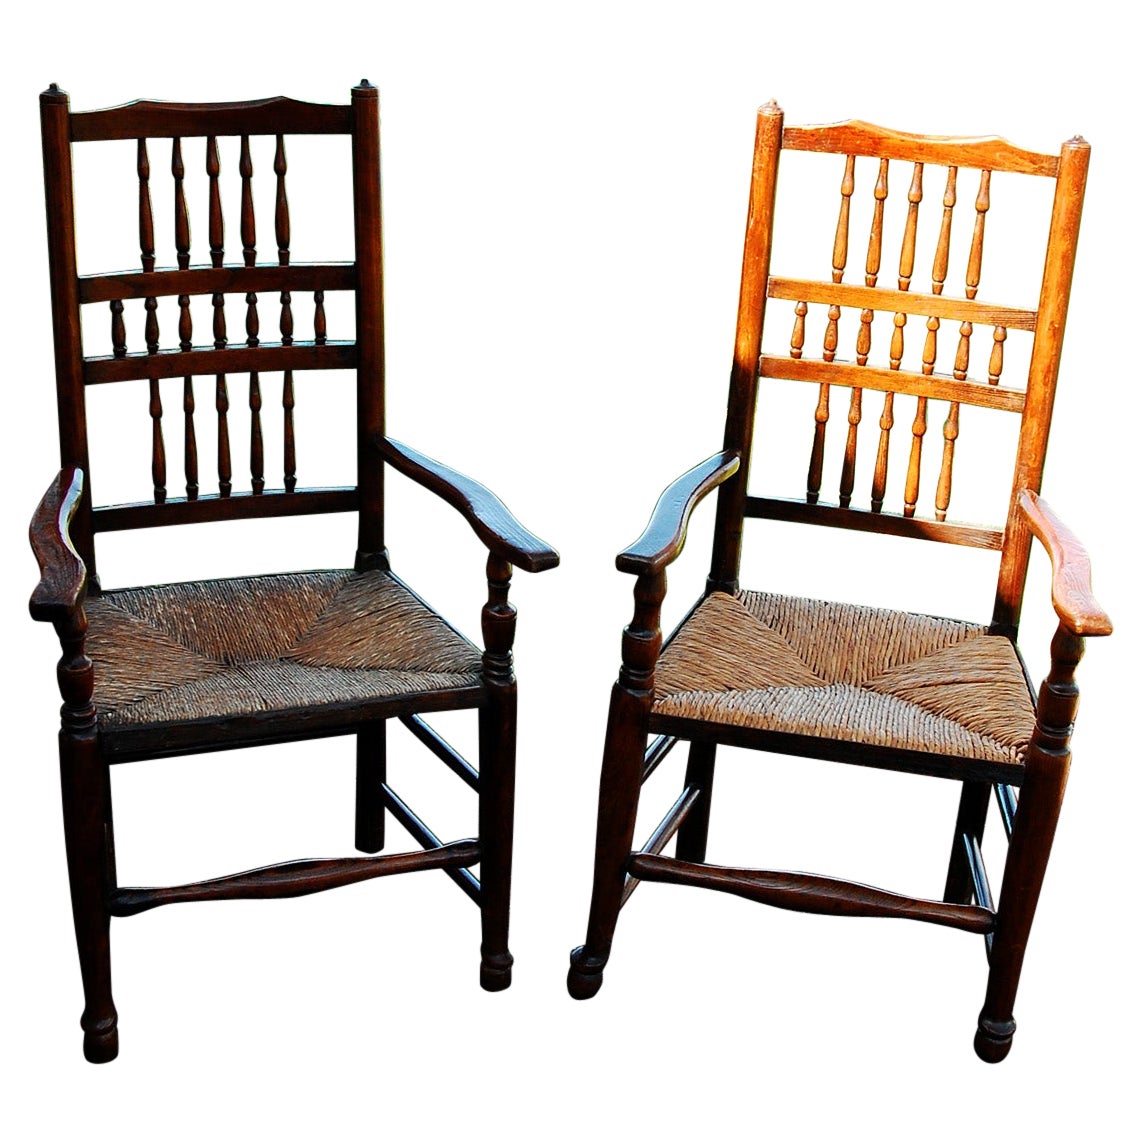 English Early 19th Century Matched Pair of Spindleback Armchairs in Elm